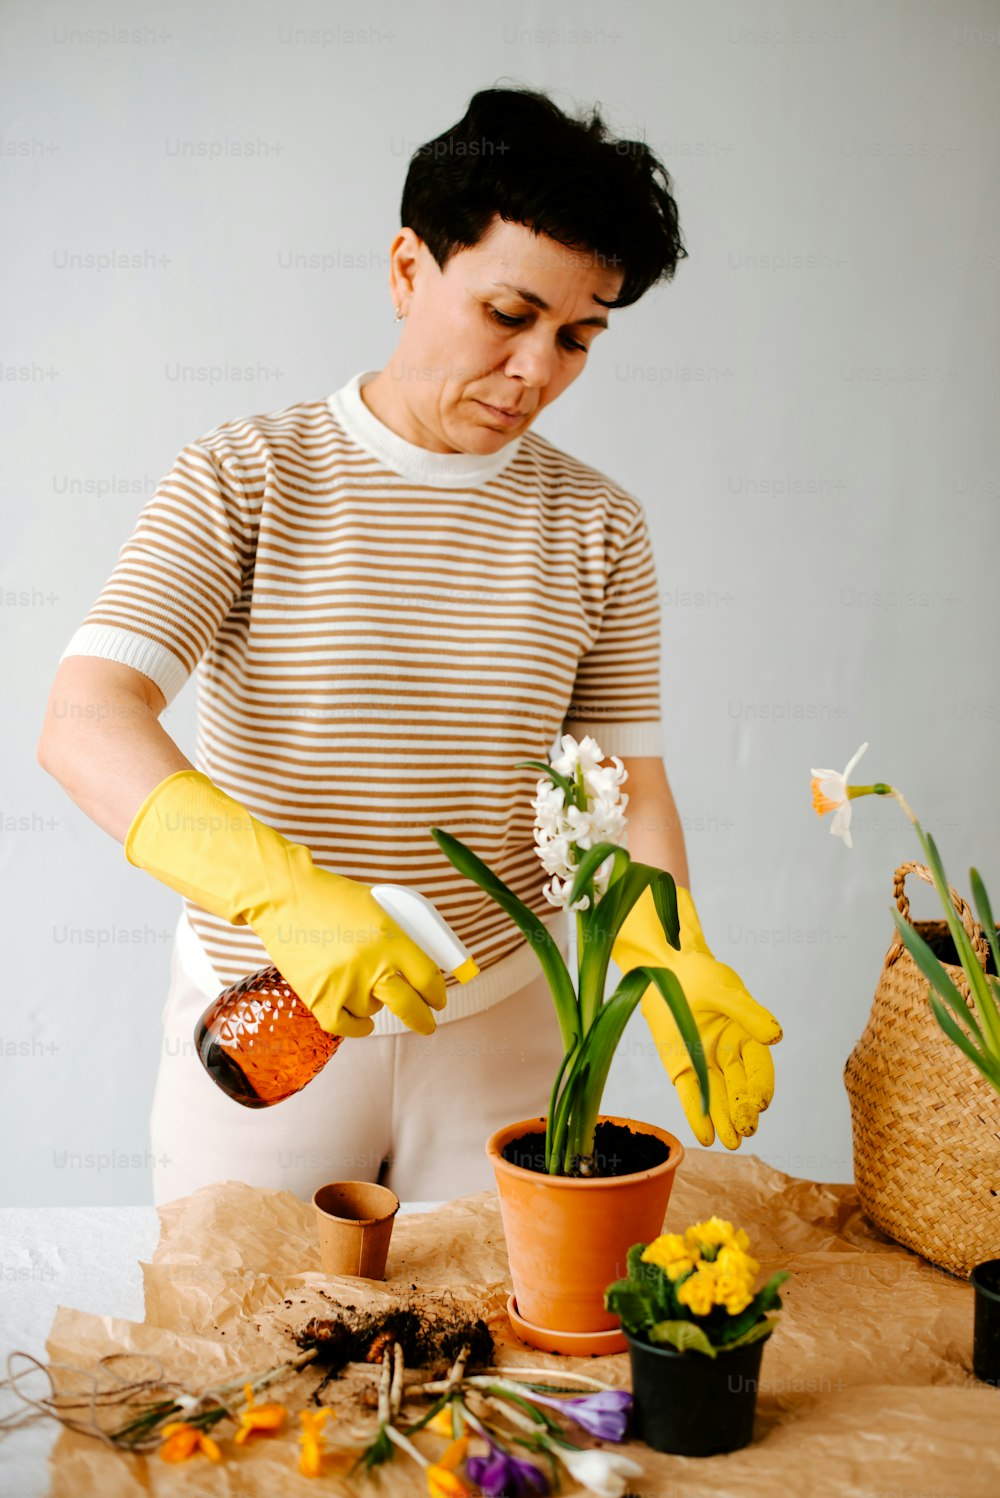 a woman in a striped shirt and yellow gloves is painting a potted plant